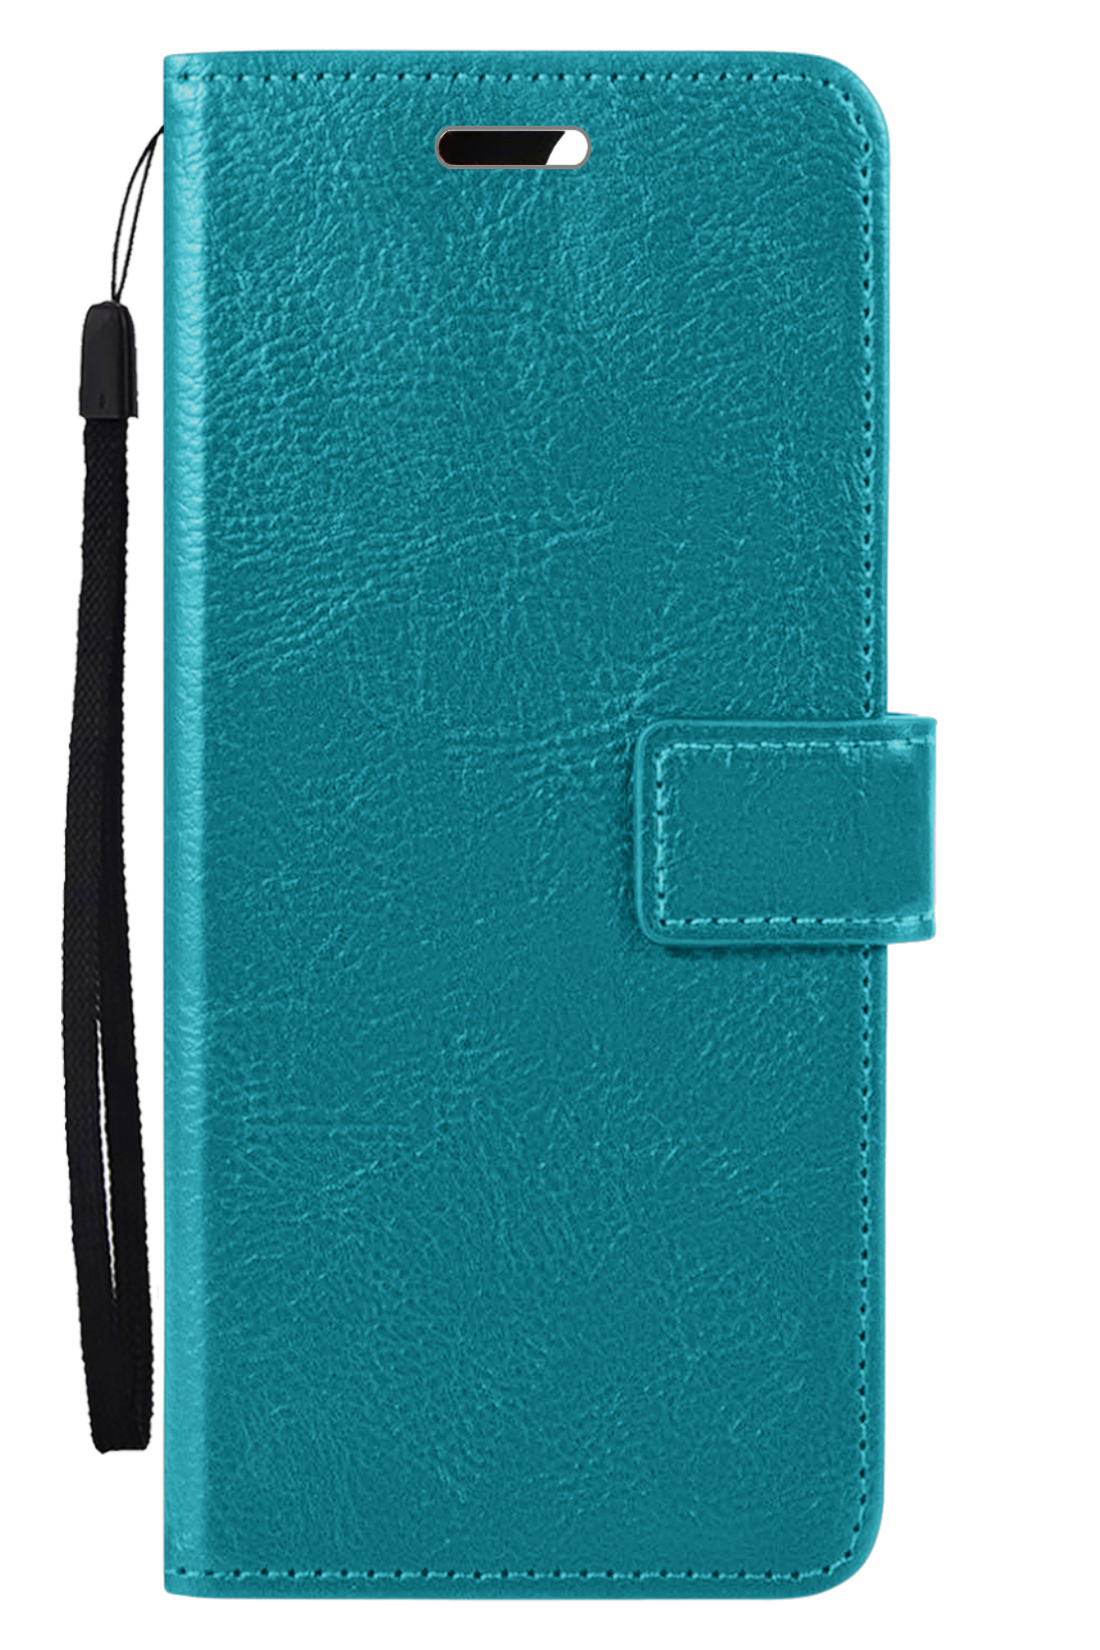 Nomfy OnePlus Nord CE 2 Hoes Bookcase Flipcase Book Cover Met 2x Screenprotector - OnePlus Nord CE 2 Hoesje Book Case - Turquoise